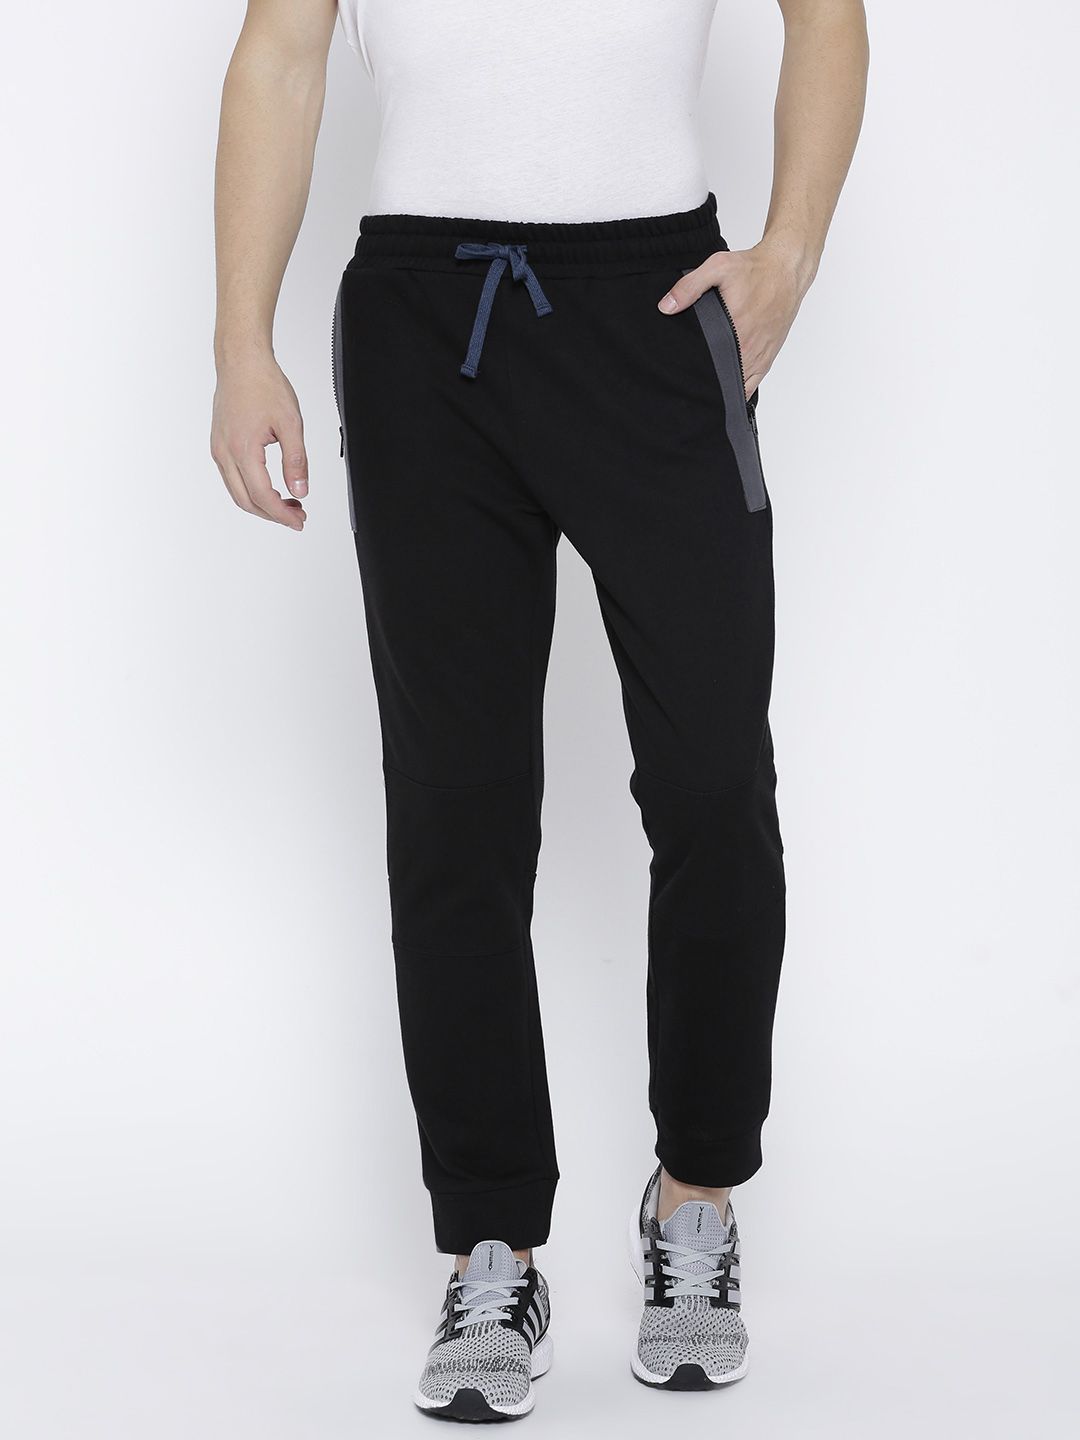 United Colors of Benetton Black Cotton Trackpants - Buy United Colors ...